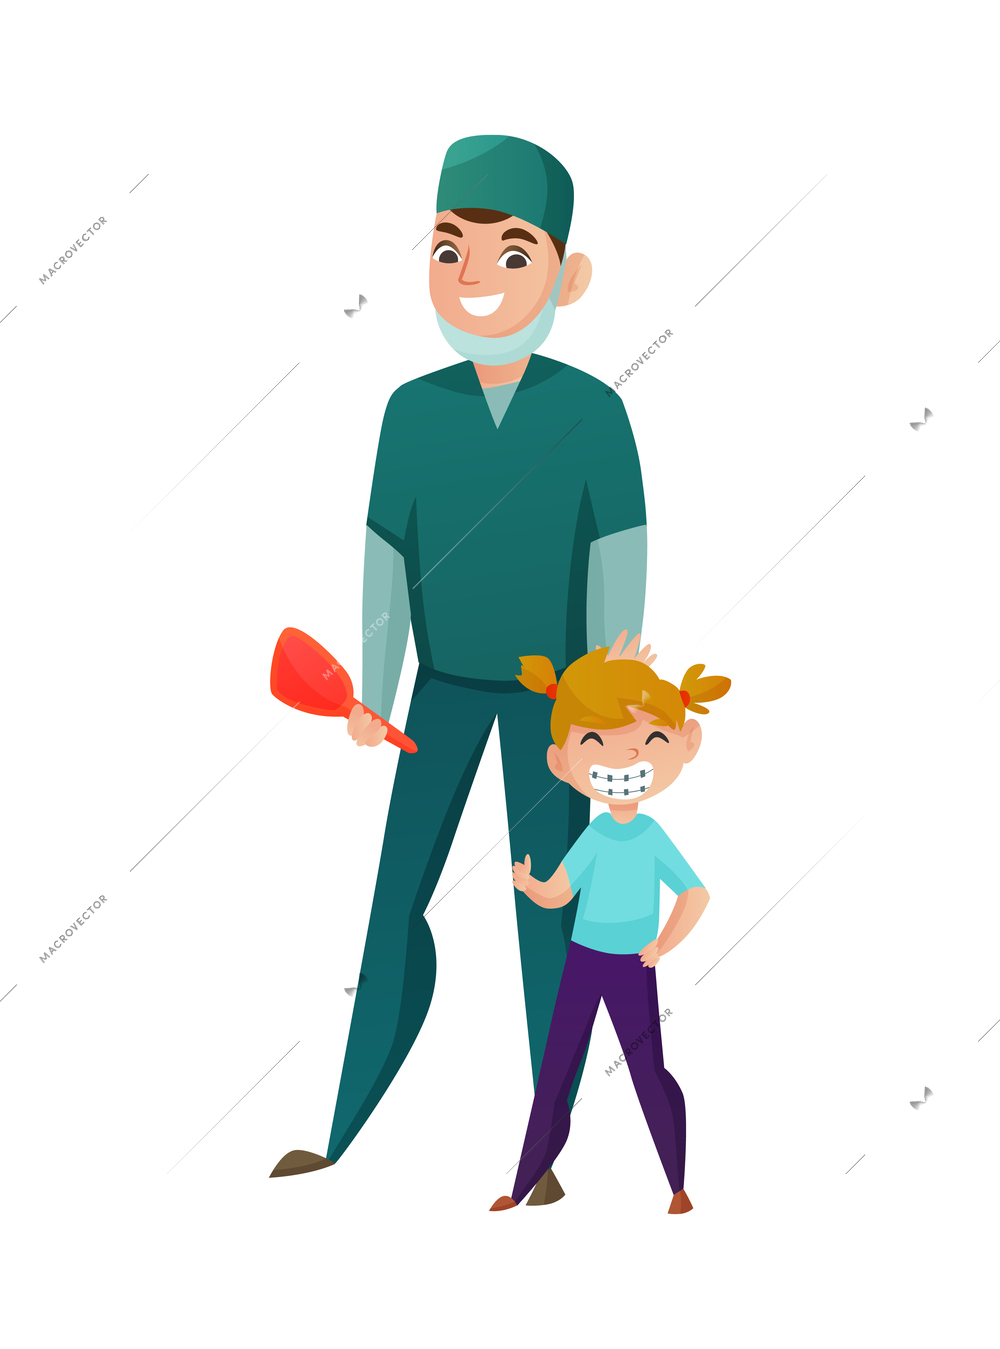 Pediatric dentistry flat concept with happy characters of male dentist and girl wearing orthodontic braces vector illustration